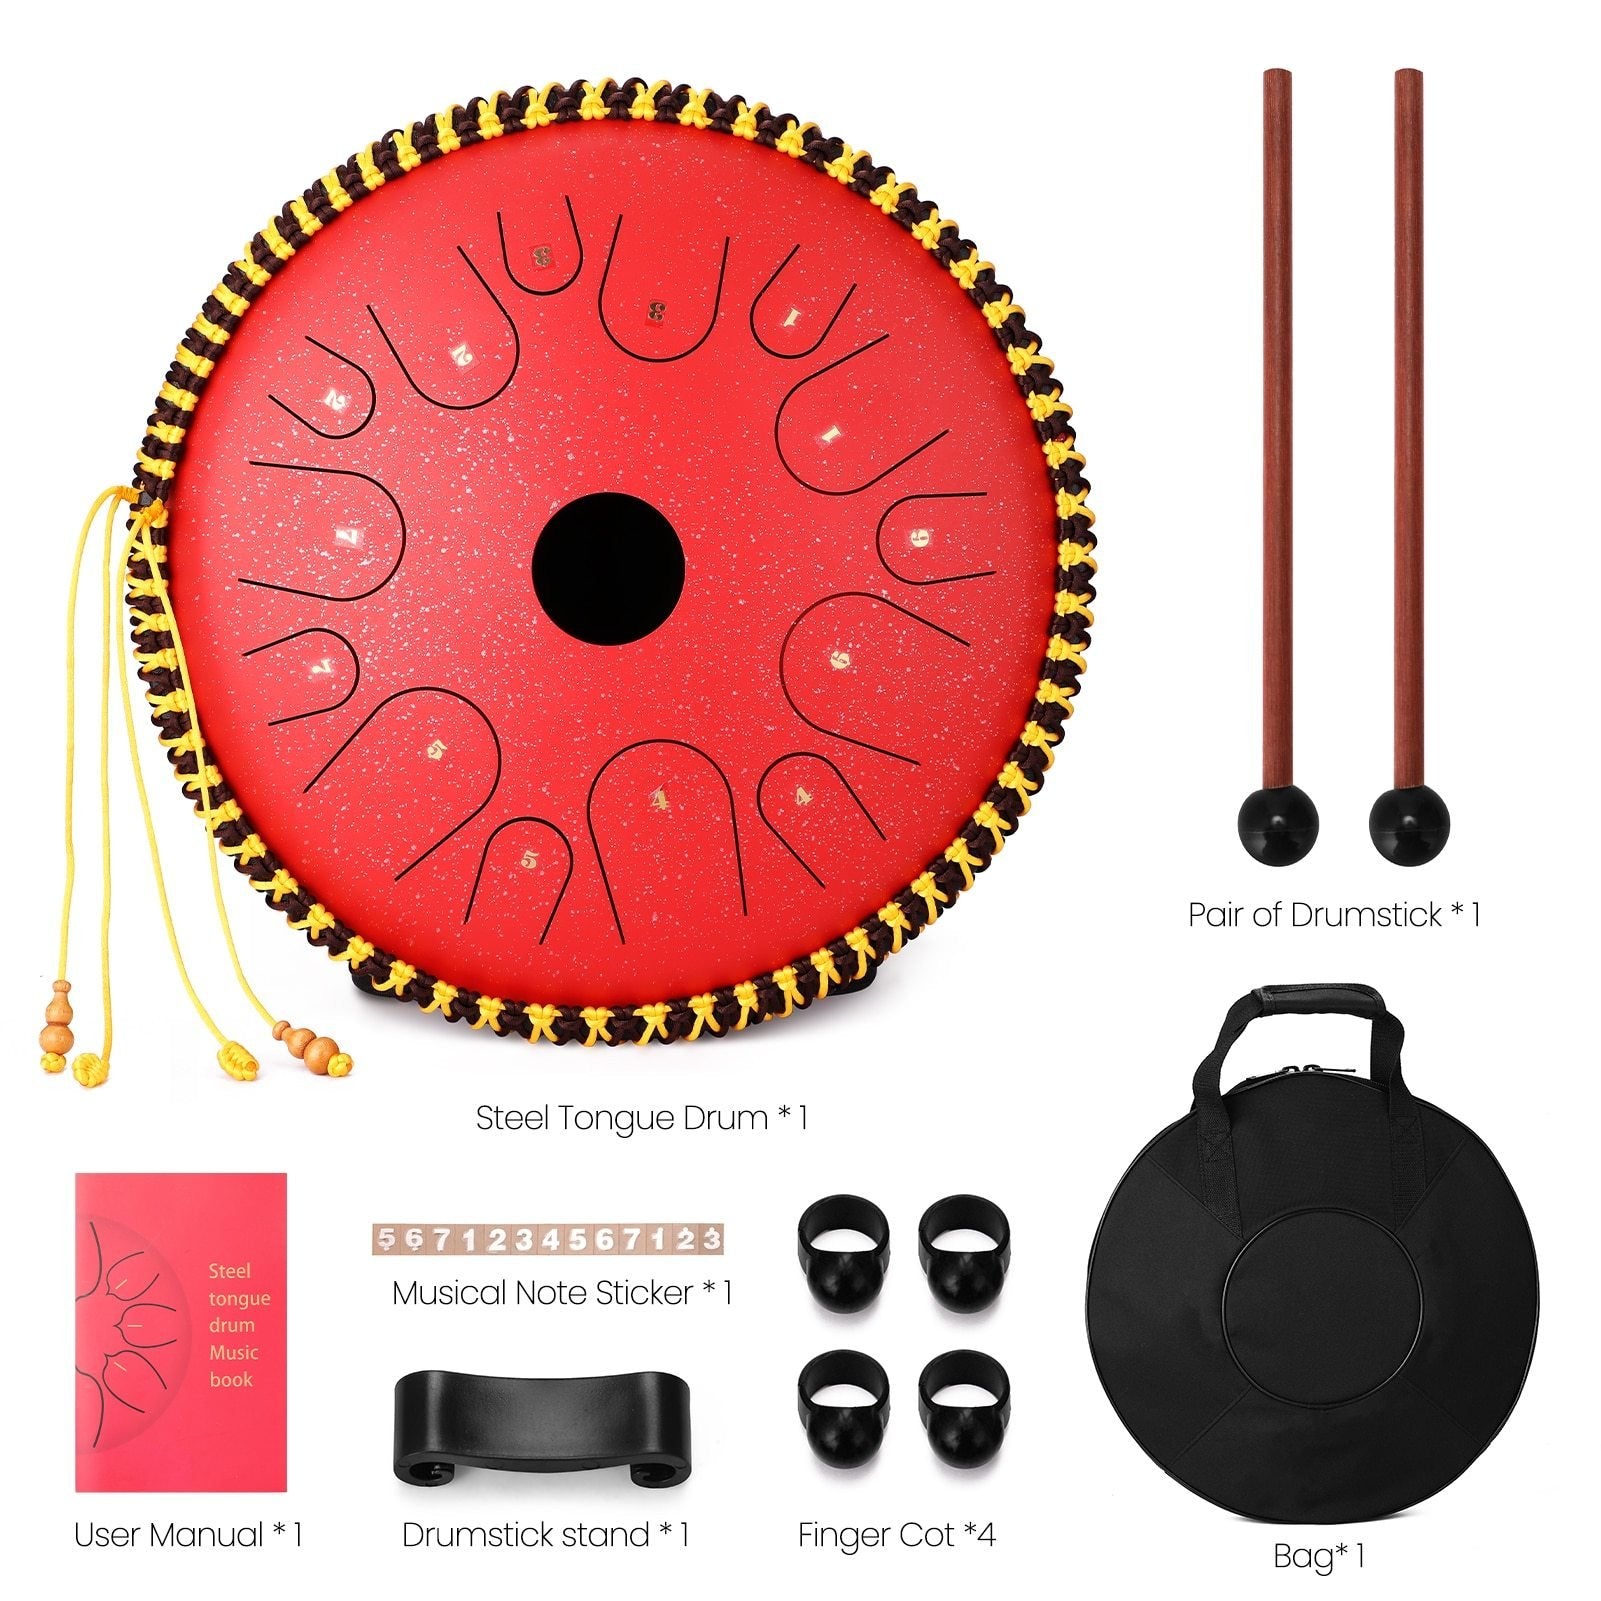 14 inch 14-Tone Carbon Steel Tongue Drum Hand Pan Drums with Drumsticks Percussion Musical Instruments - AKLOT